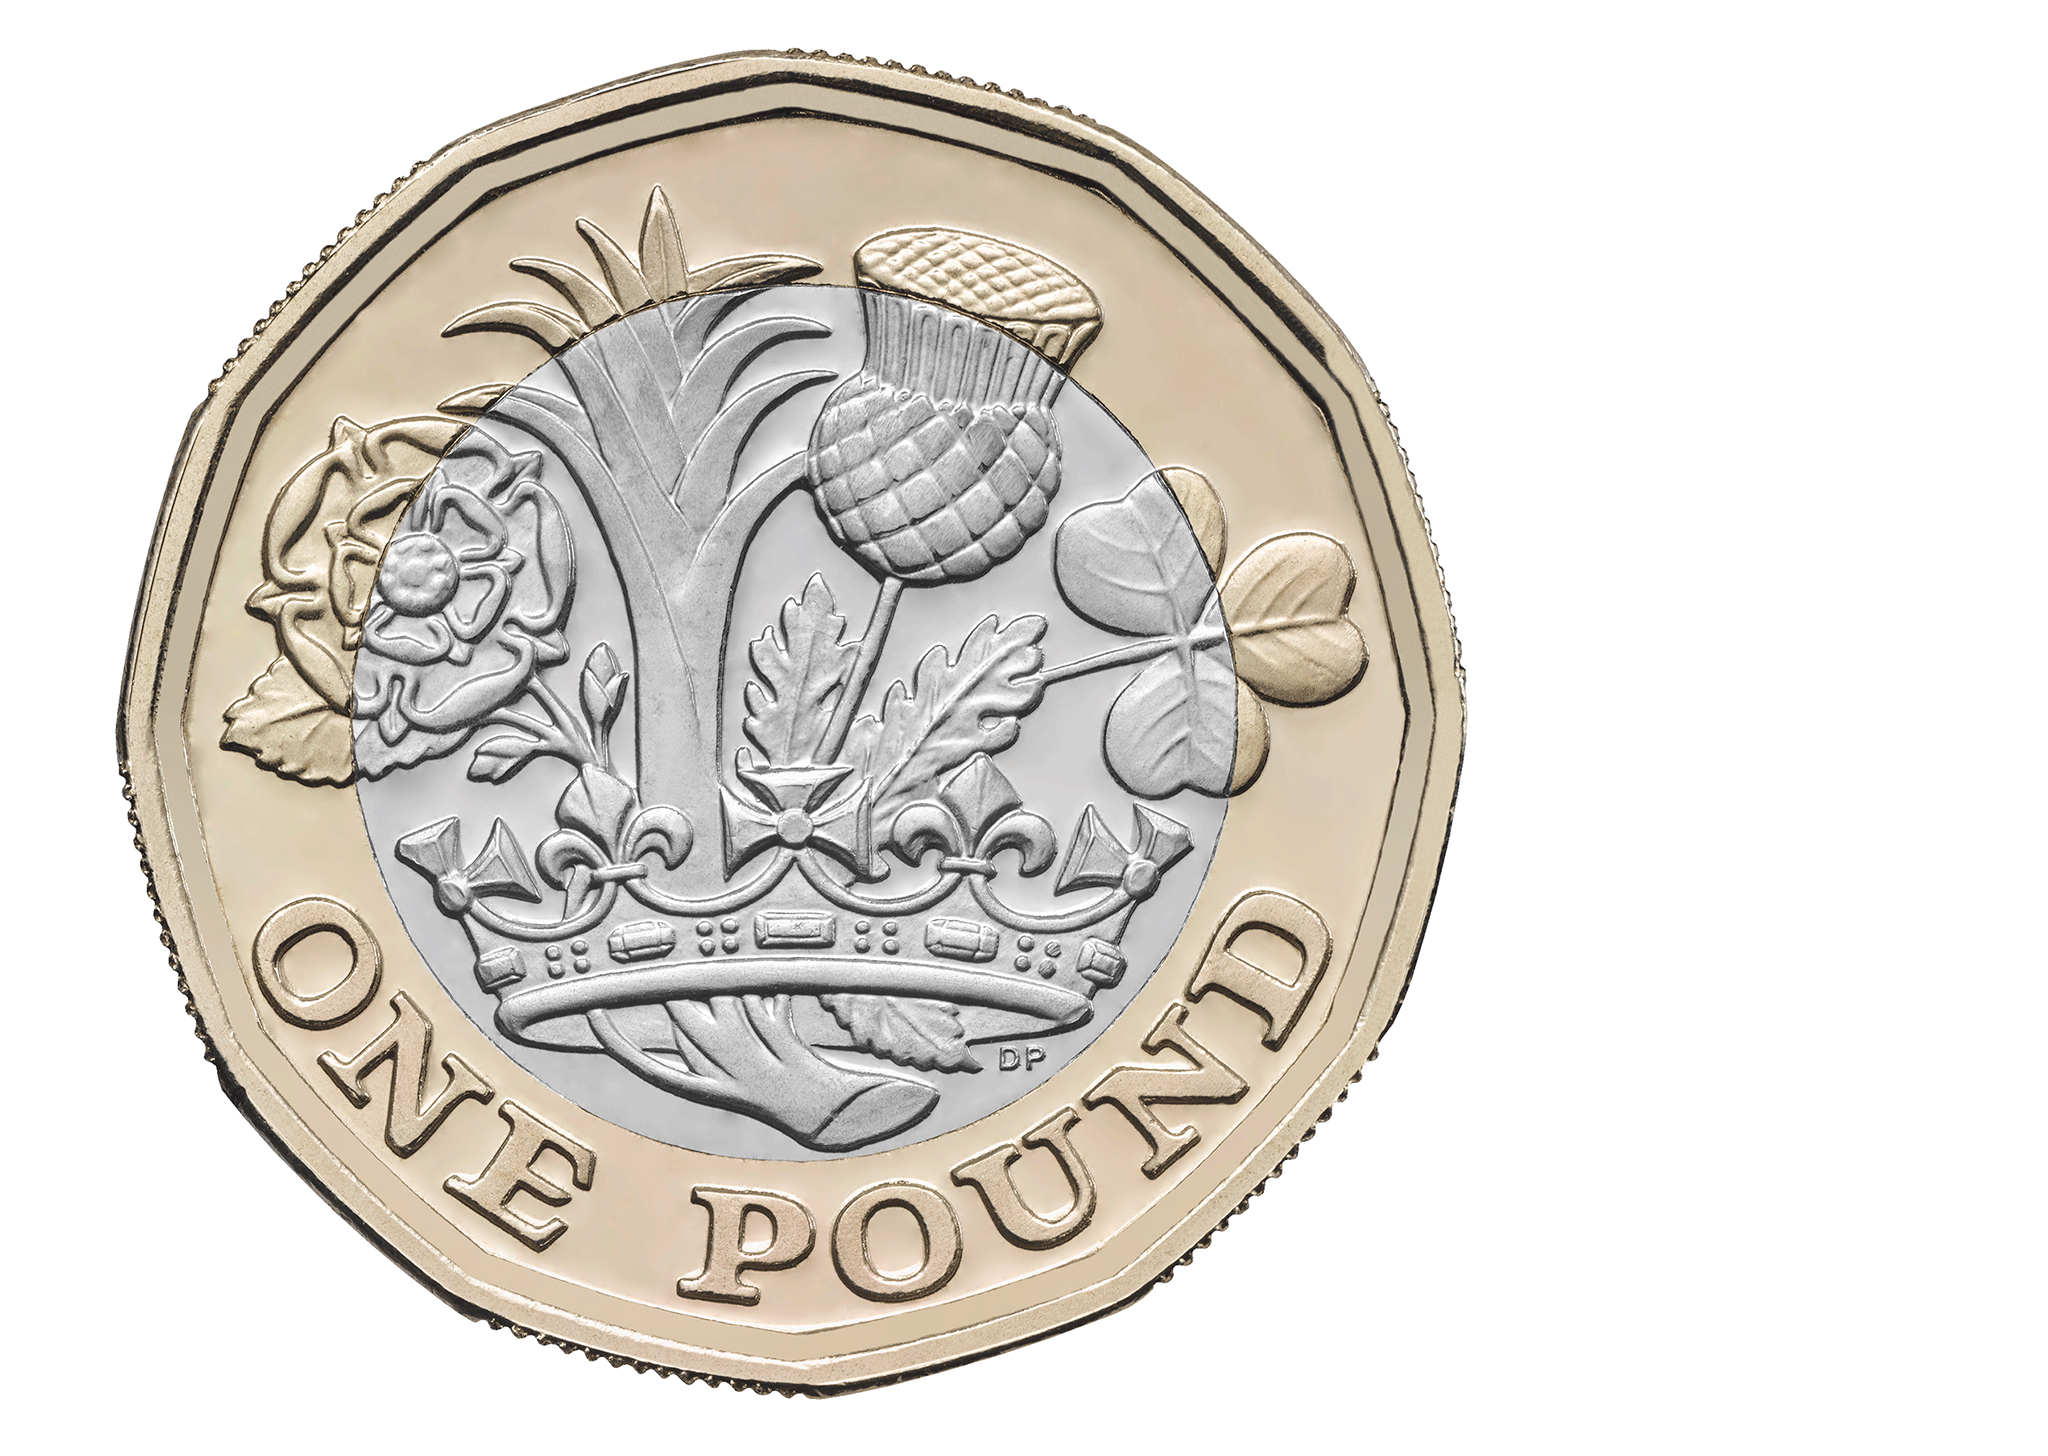 The new £1 coin is designed to be the most secure in the world